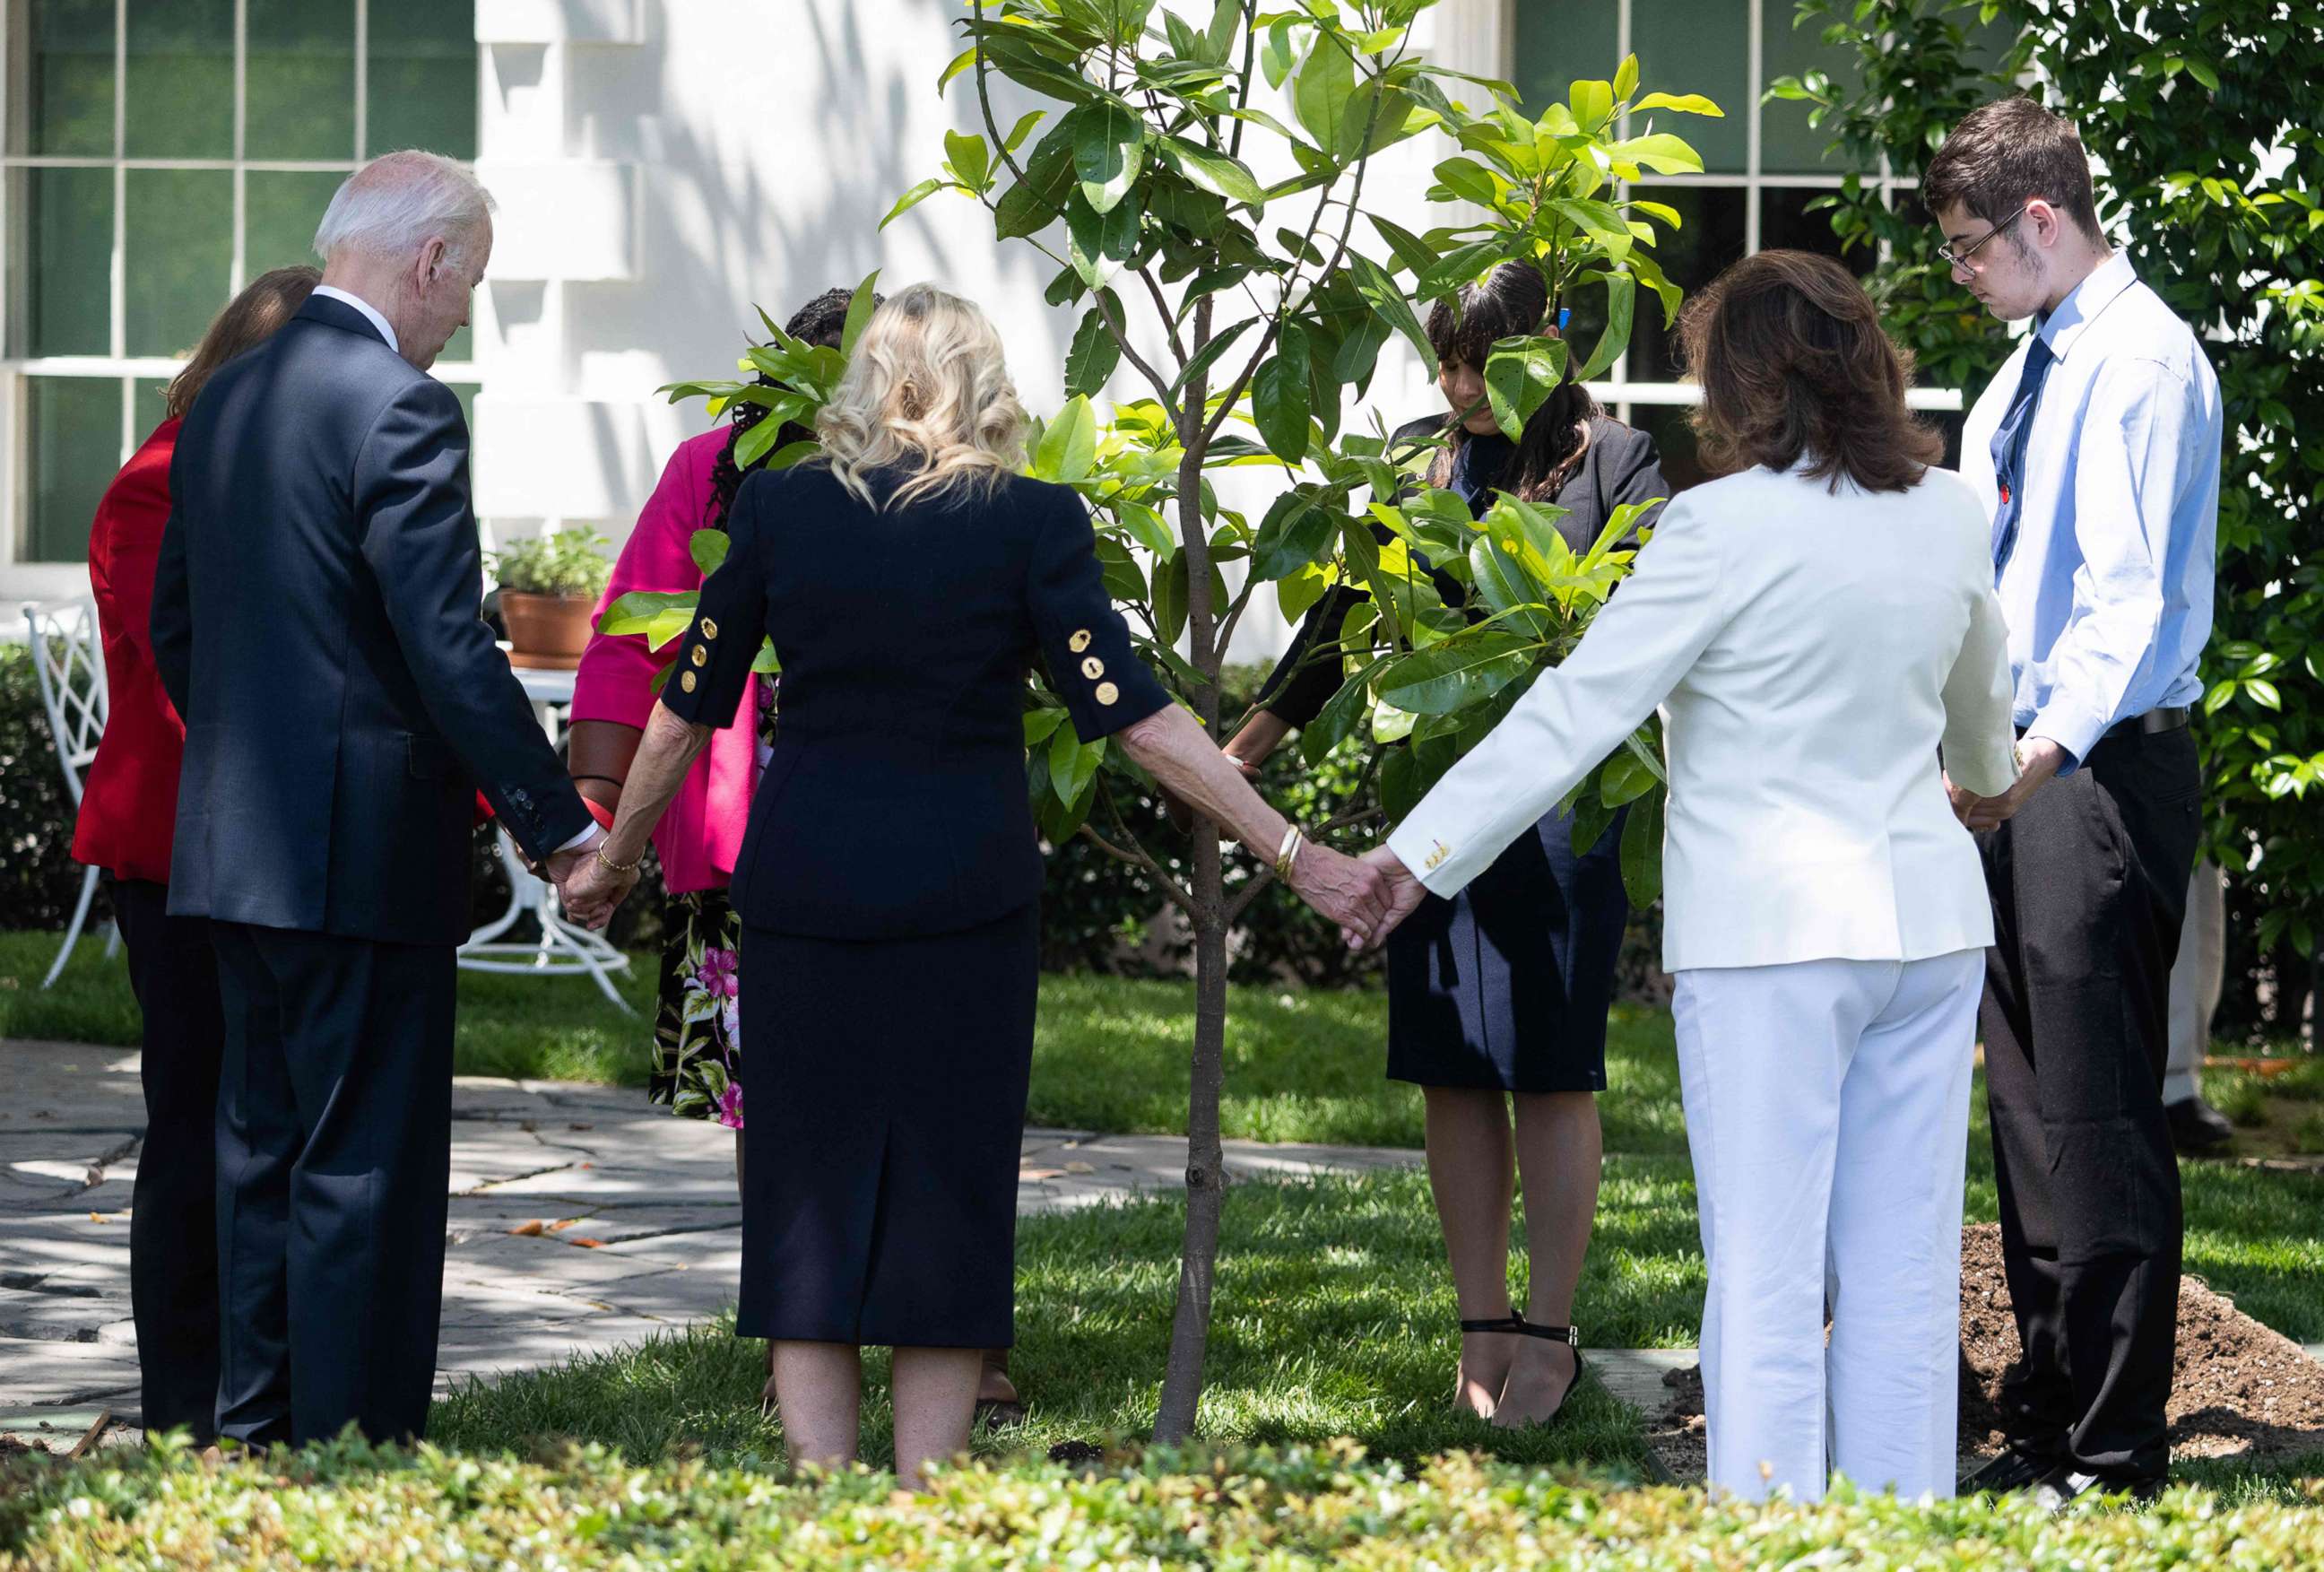 PHOTO: President Joe Biden and First Lady Jill Biden pray as they participate in a tree planting ceremony, in honor of Memorial Day, on the South Lawn of the White House in Washington, D.C., on May 30, 2022.